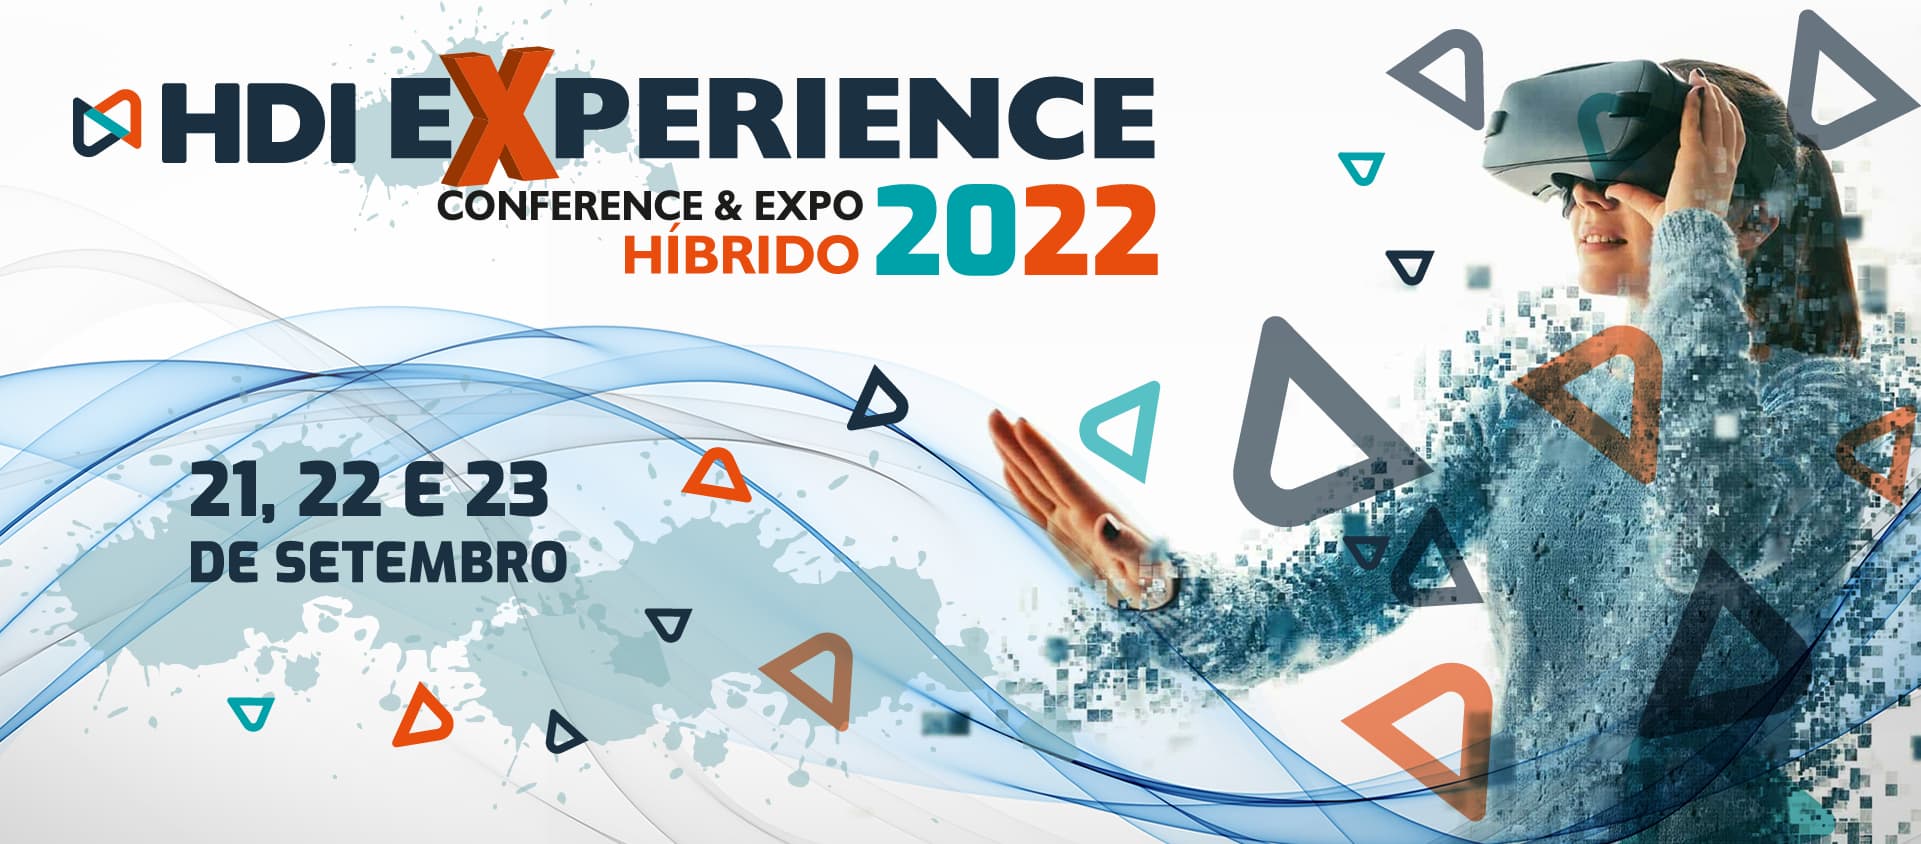 HDI  EXPERIENCE 2022